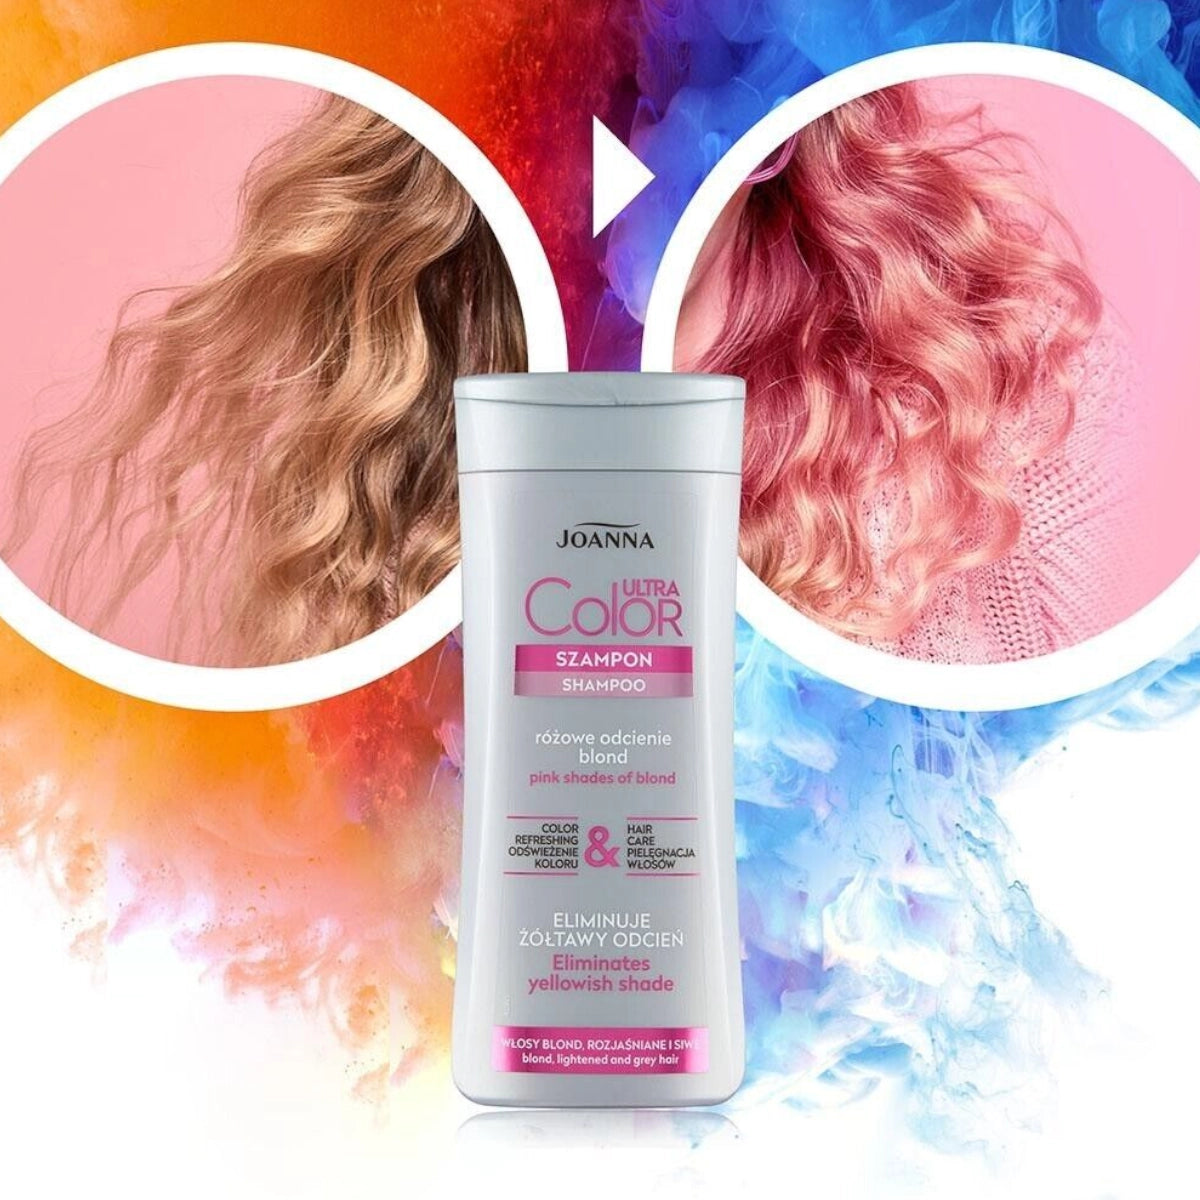 Joanna Ultra Color Pink Hair Shampoo Eliminate Yellow Shade features